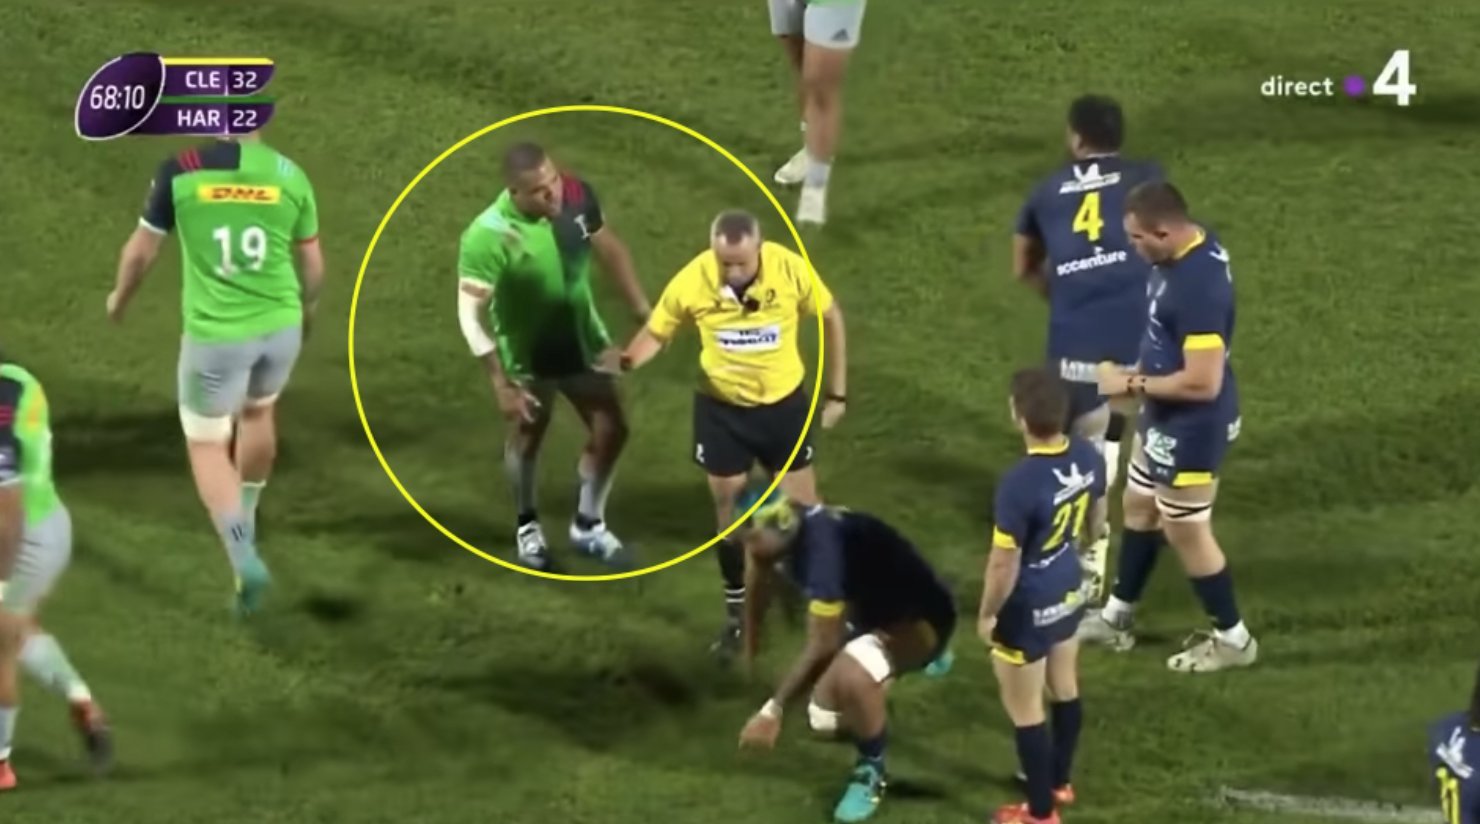 Kyle Sinckler makes one of the strangest noises you will have ever heard on a rugby pitch